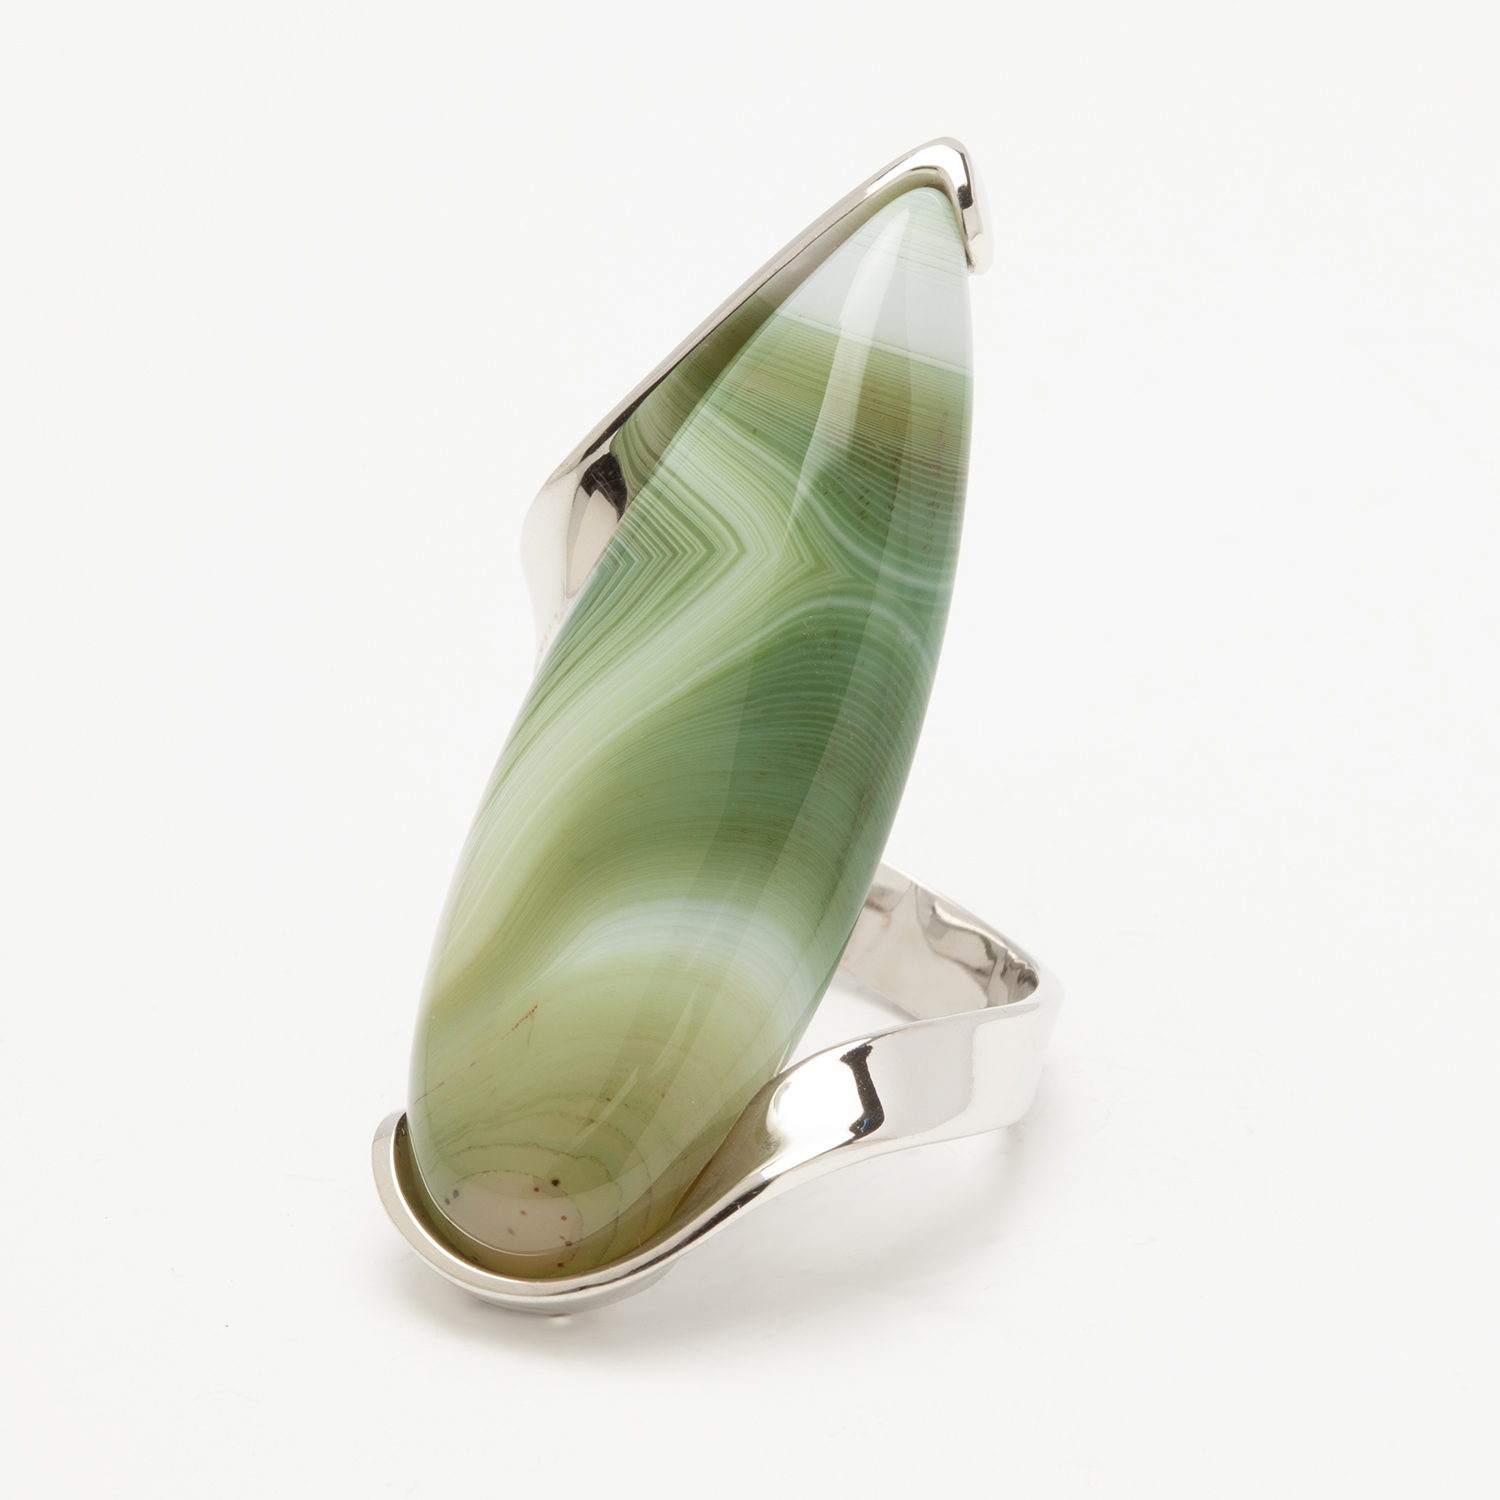 Tae handmade sterling silver and green banded agate ring 1 designed by Belen Bajo